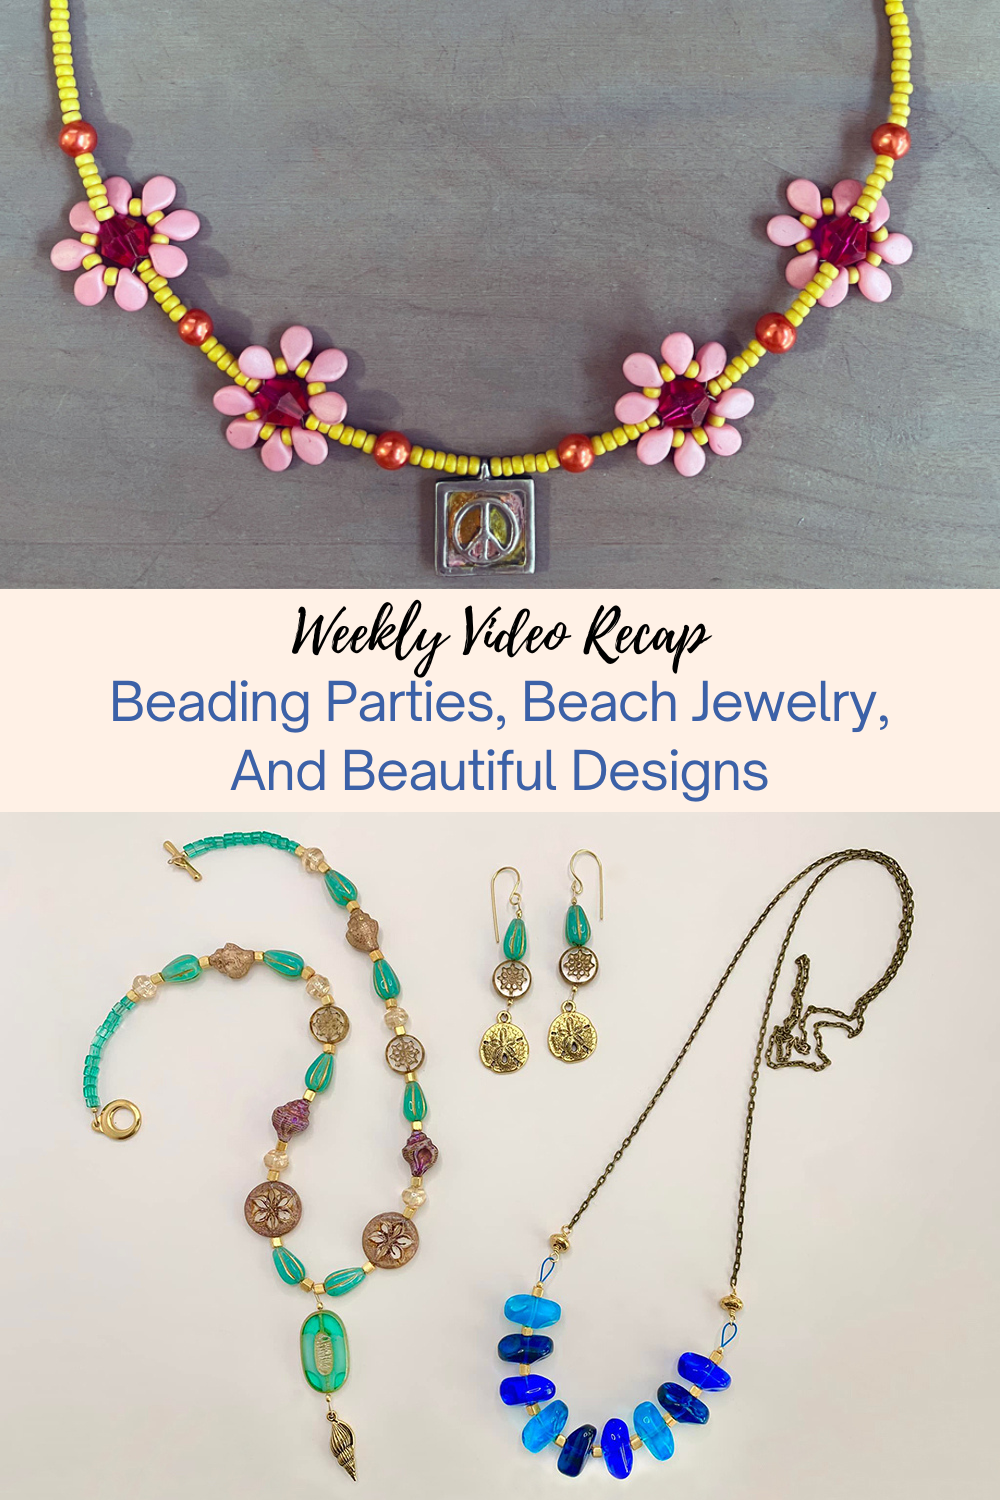 Beading Parties, Beach Jewelry, And Beautiful Designs Collage